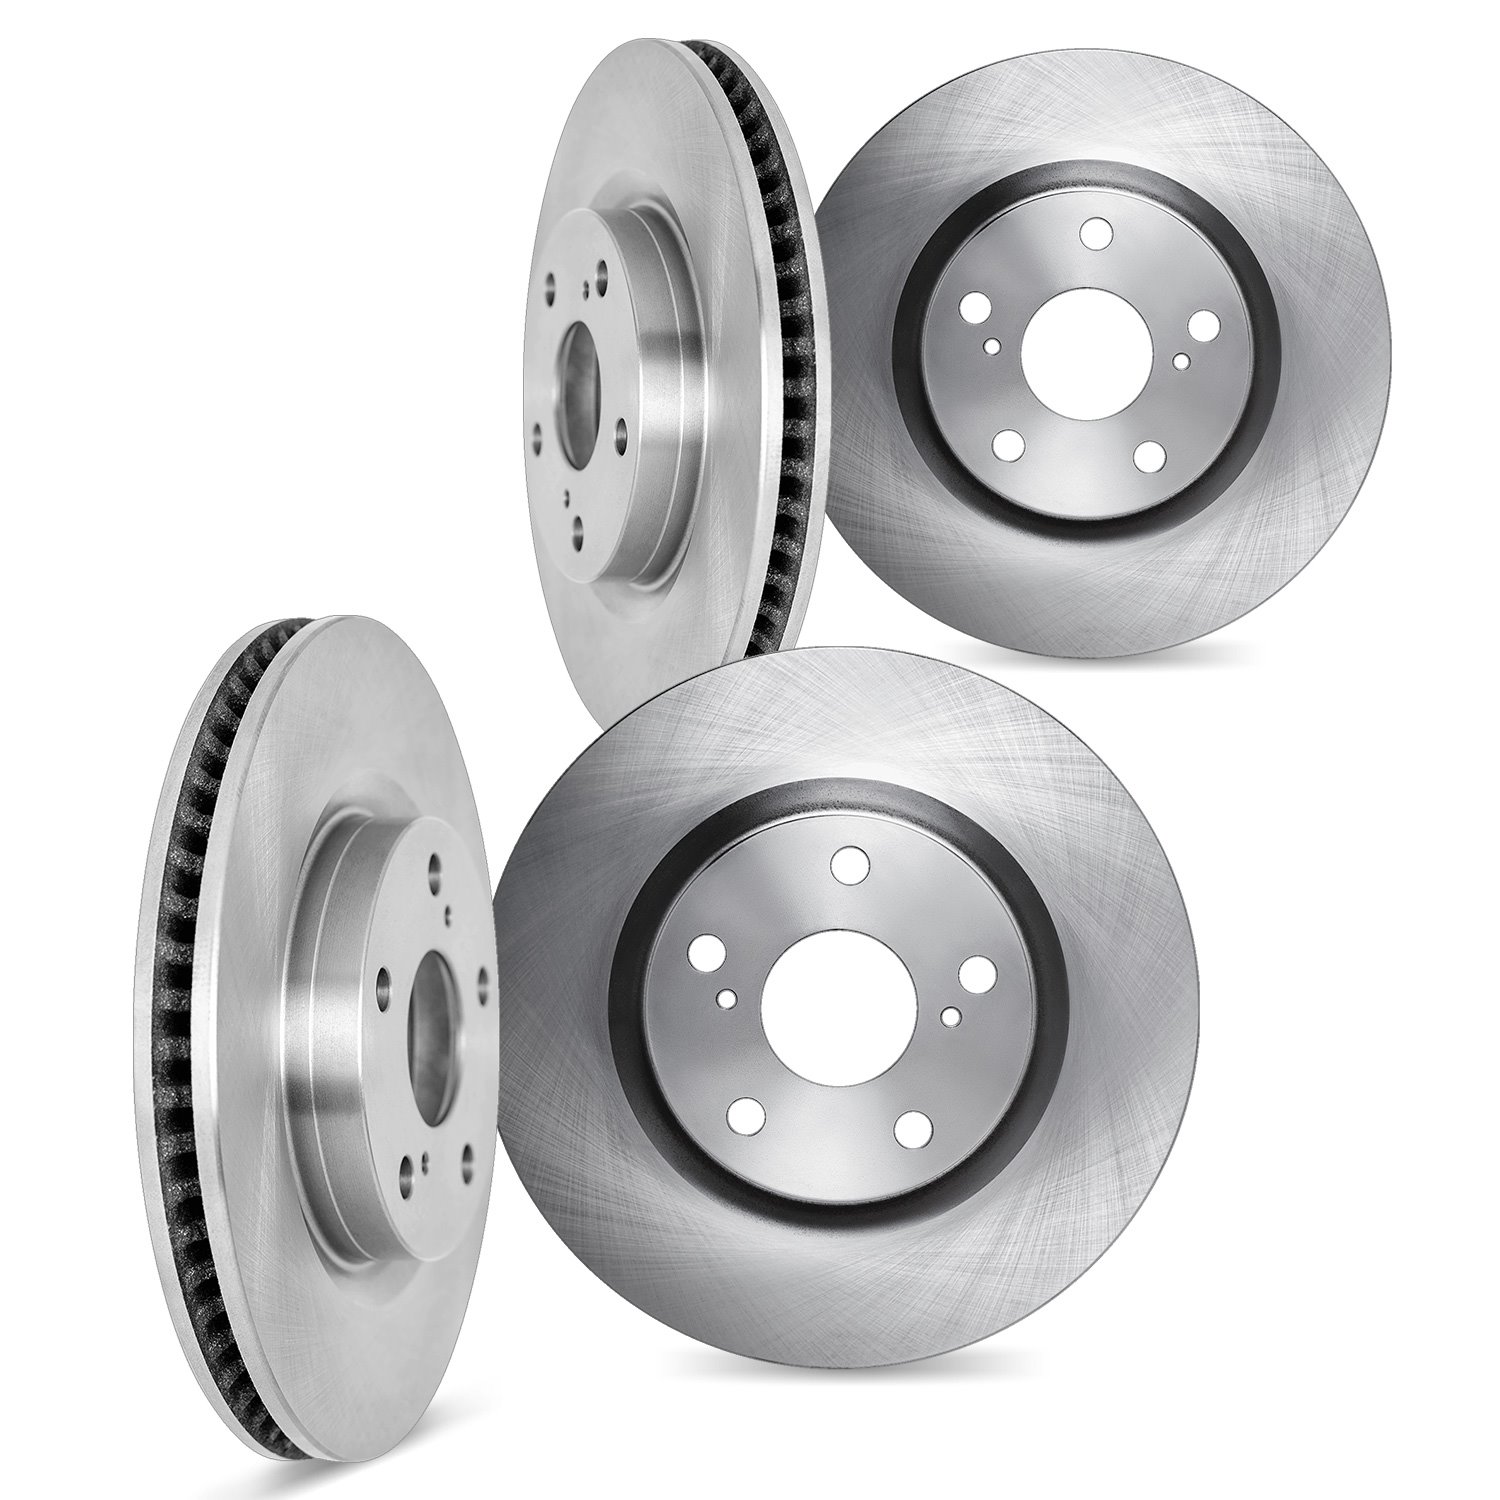 6004-68009 Brake Rotors, Fits Select Infiniti/Nissan, Position: Front and Rear